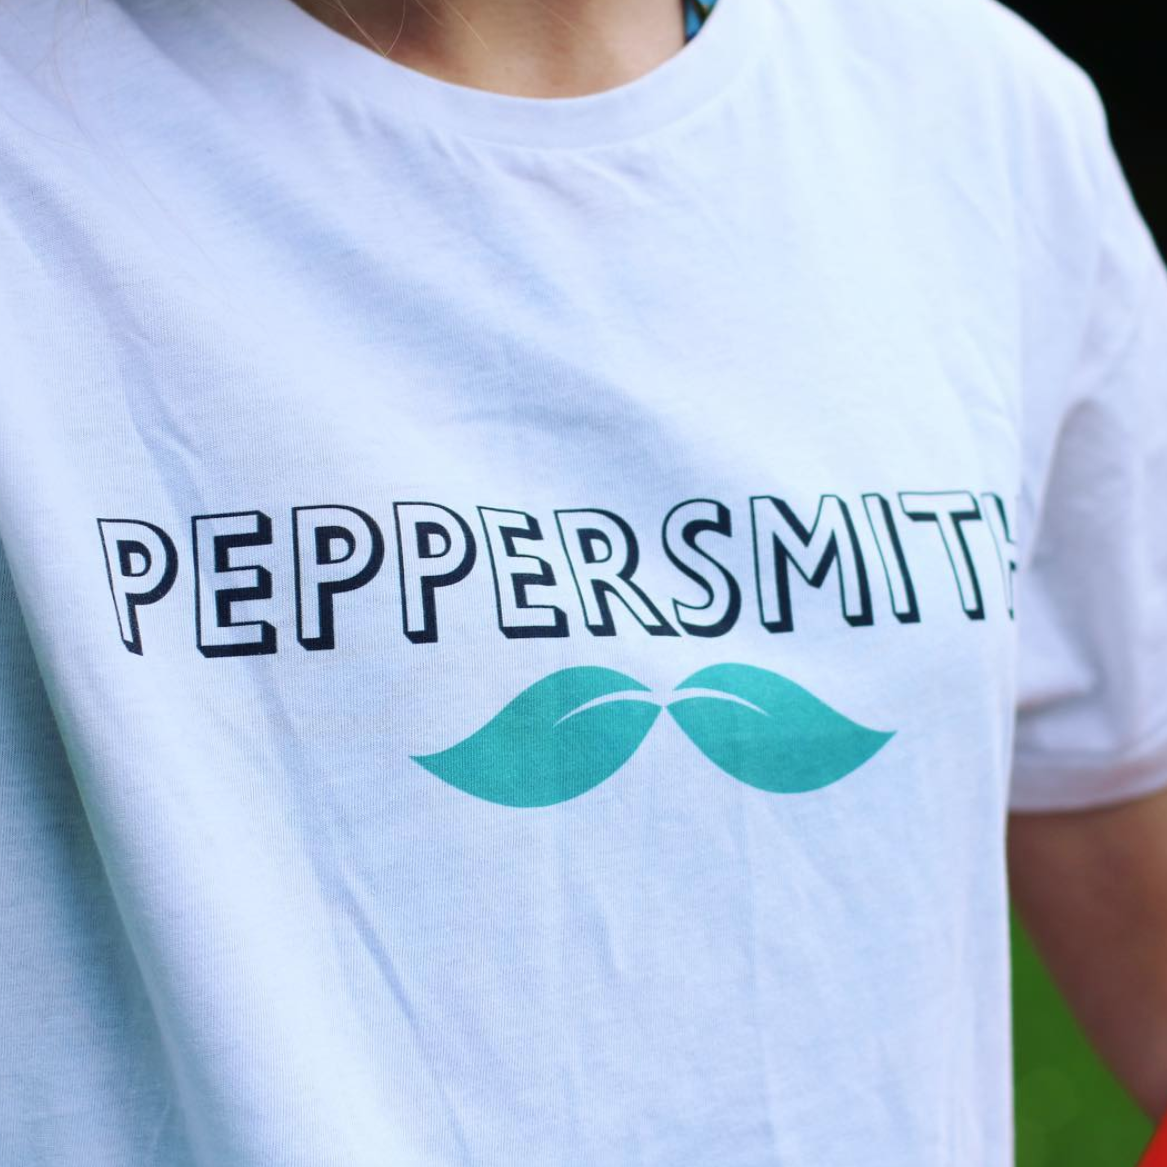 Sugar free gum company Peppersmith's interviewed our co founder Will